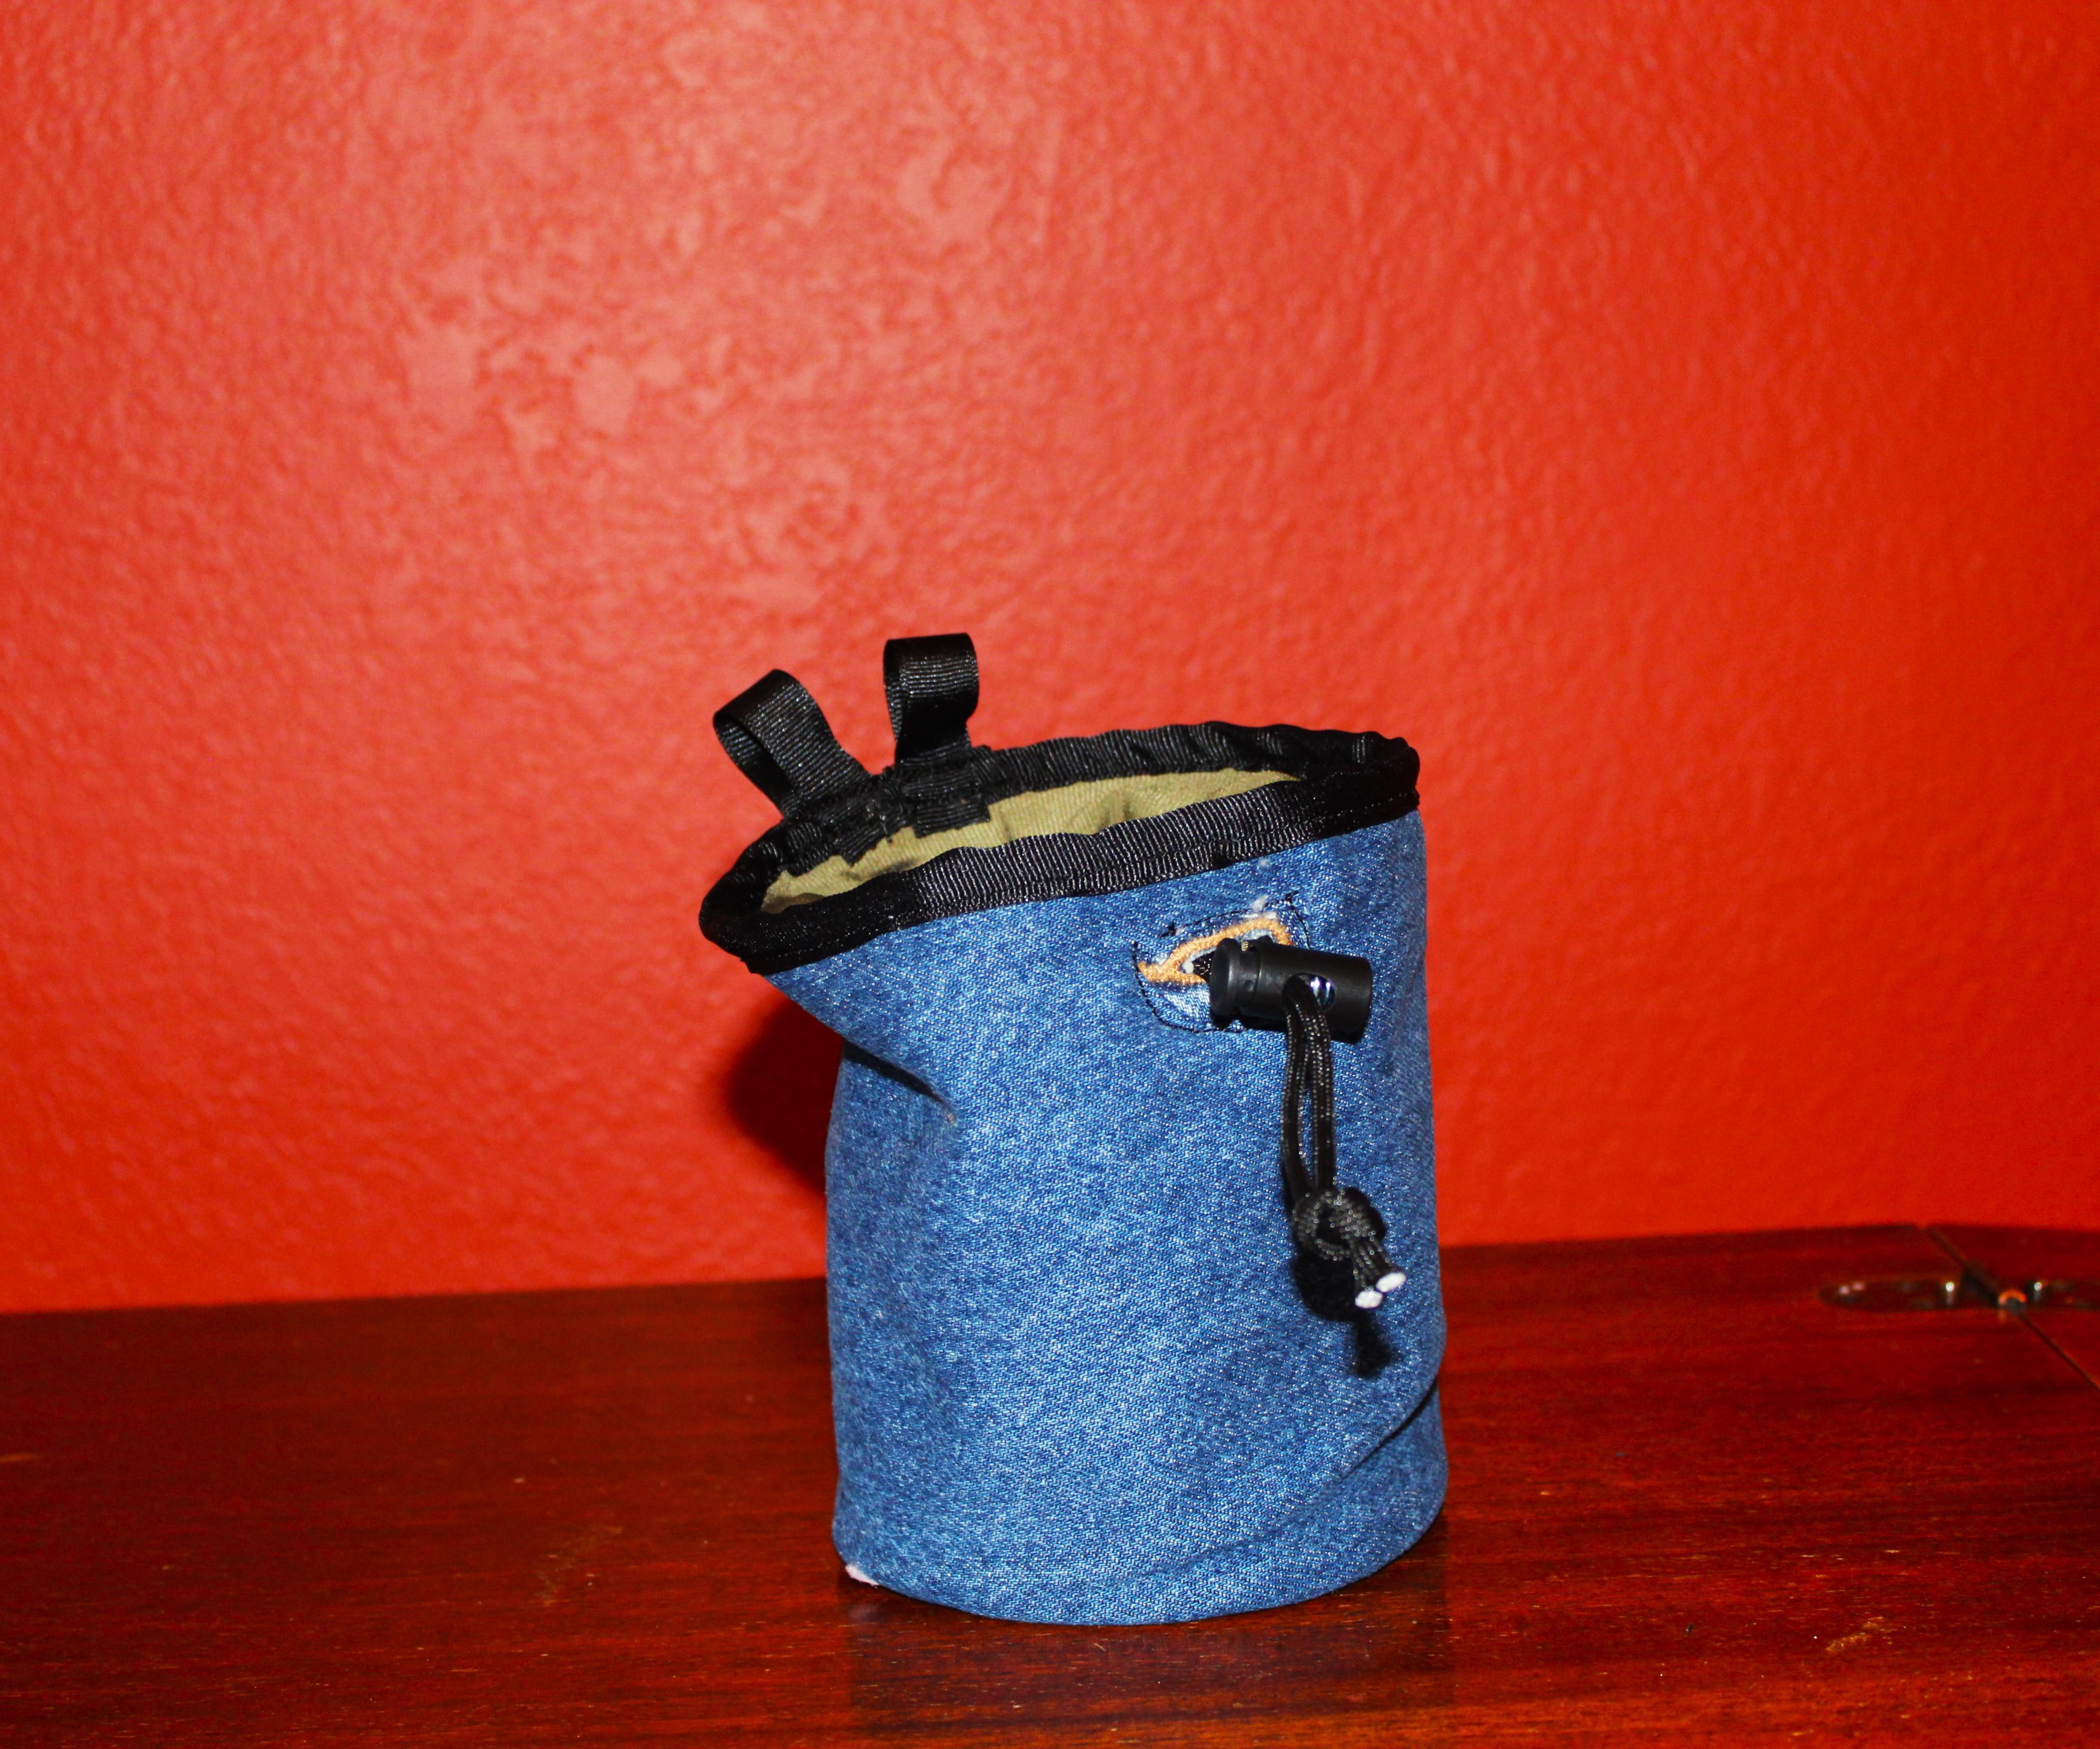 How to Make a Chalk Bag From Your Old Clothes